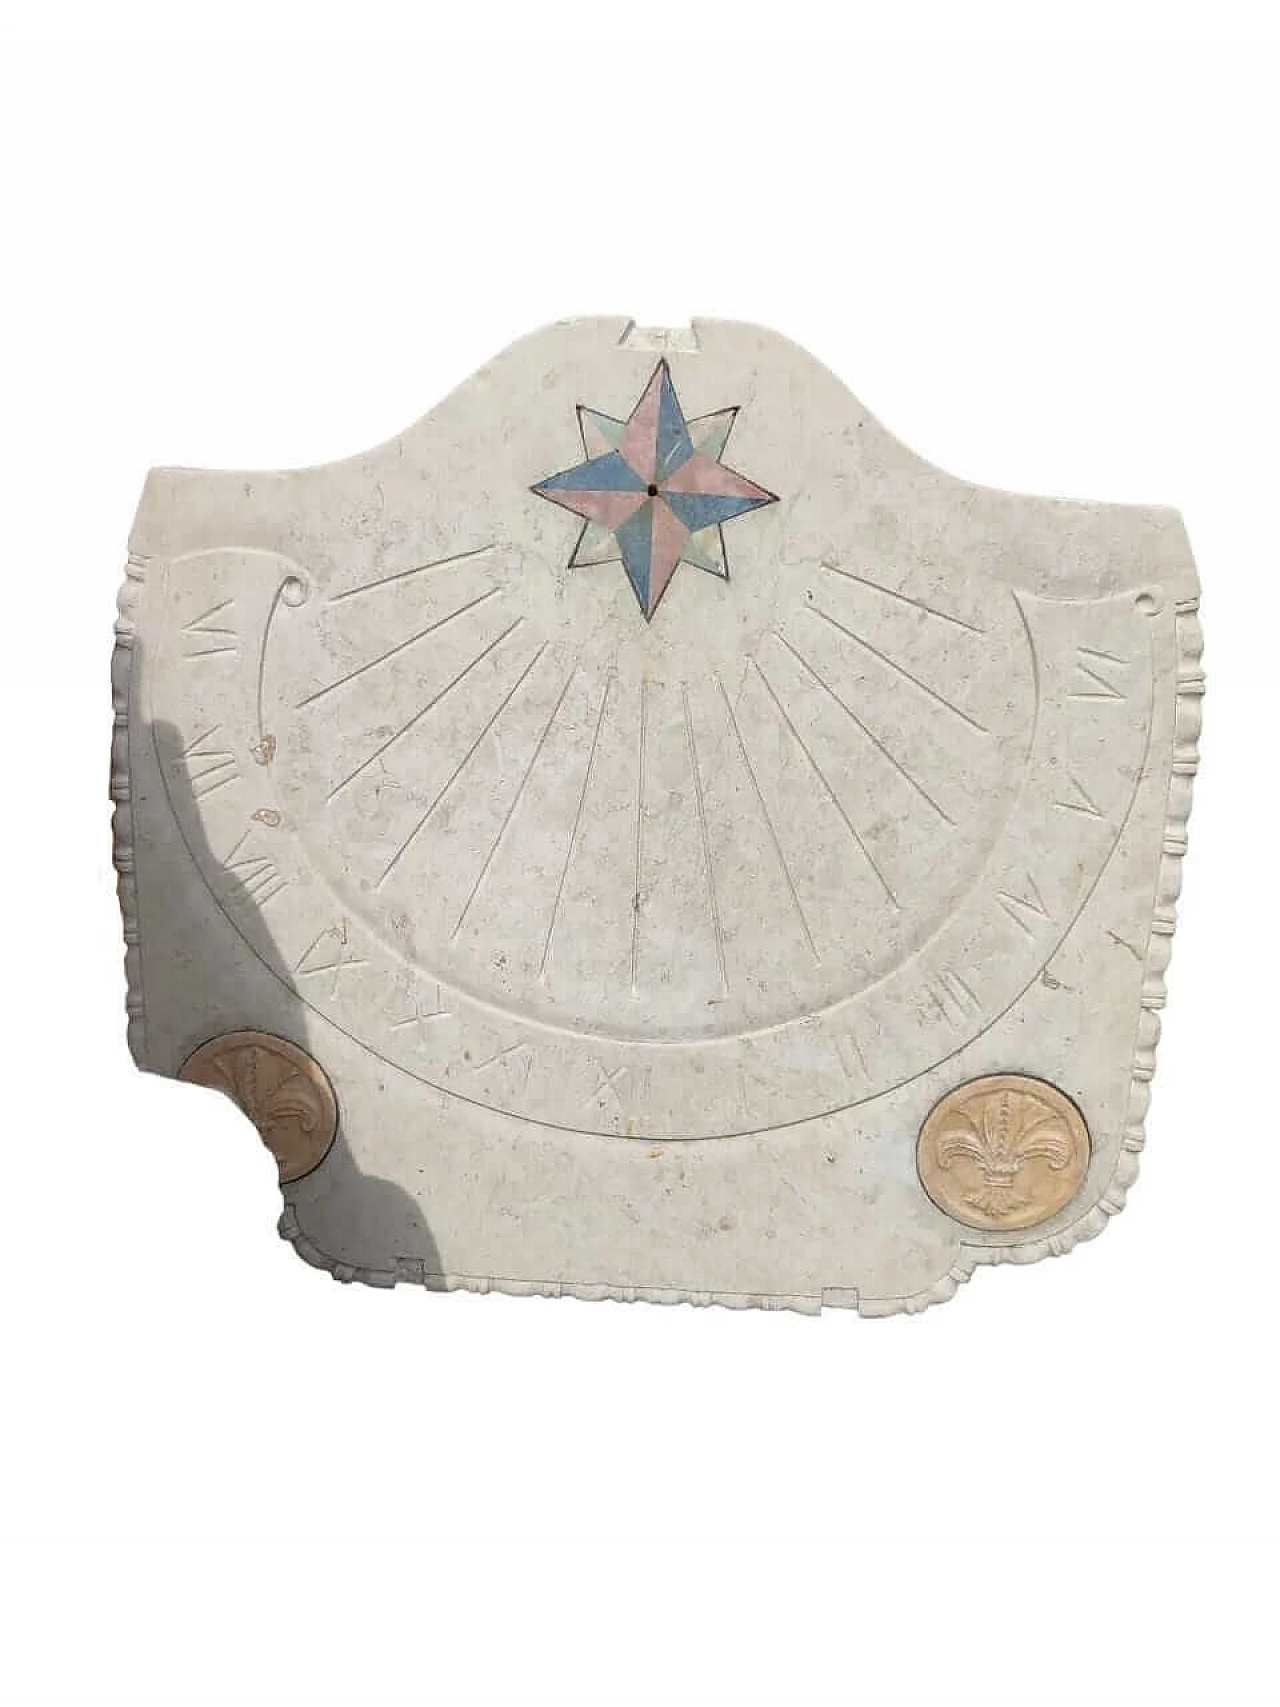 Botticino marble sundial with compass rose and Florentine lilies, 19th century 5